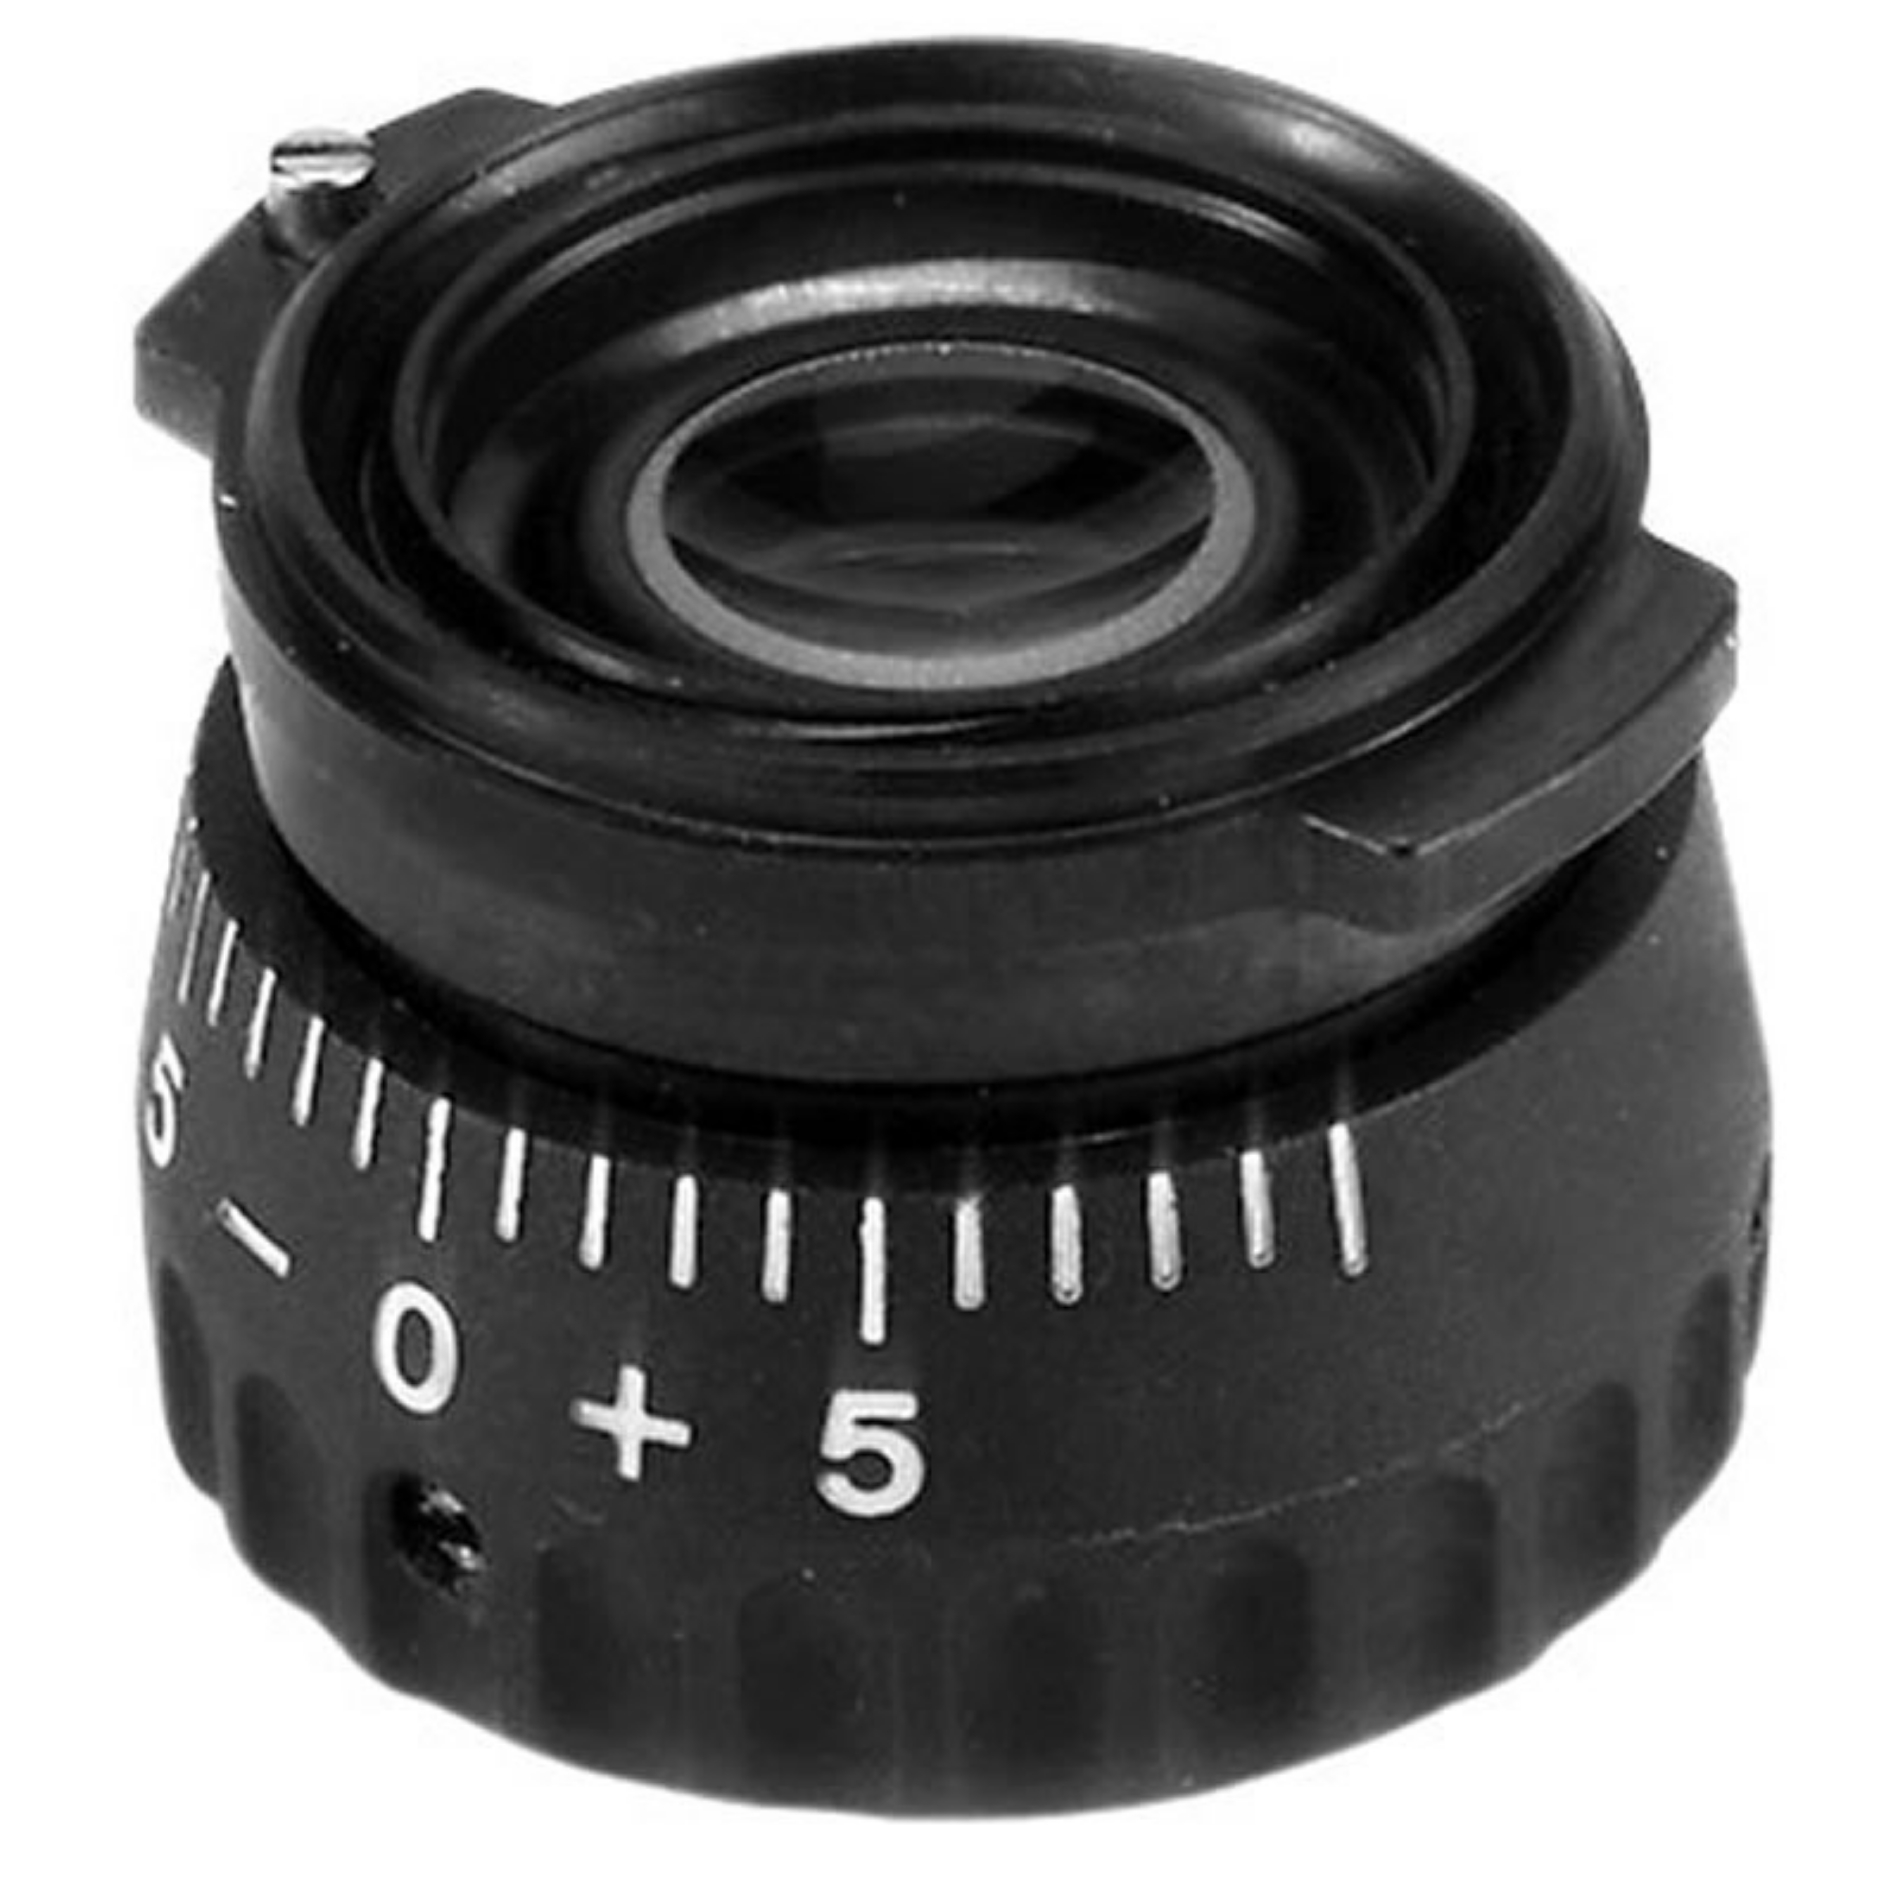 Picture of Leica FOK73 Magnification Eyepiece